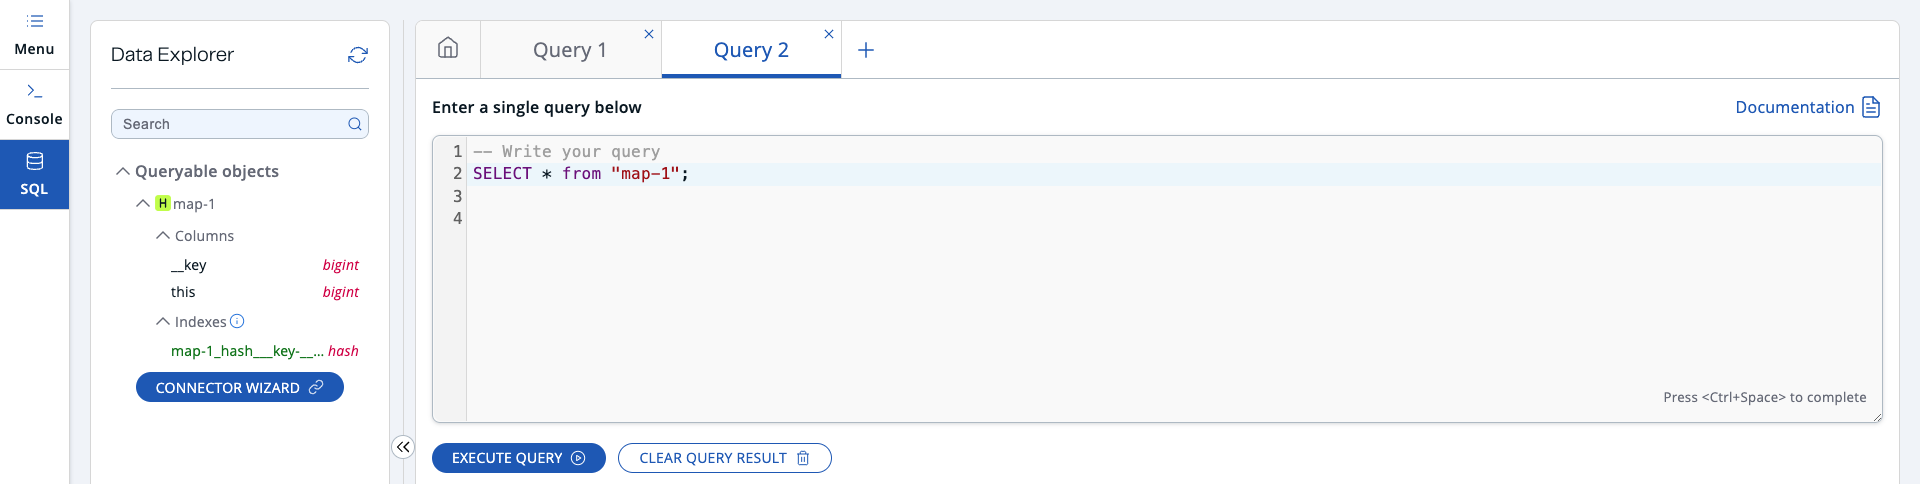 SQL Browser Queryable Objects